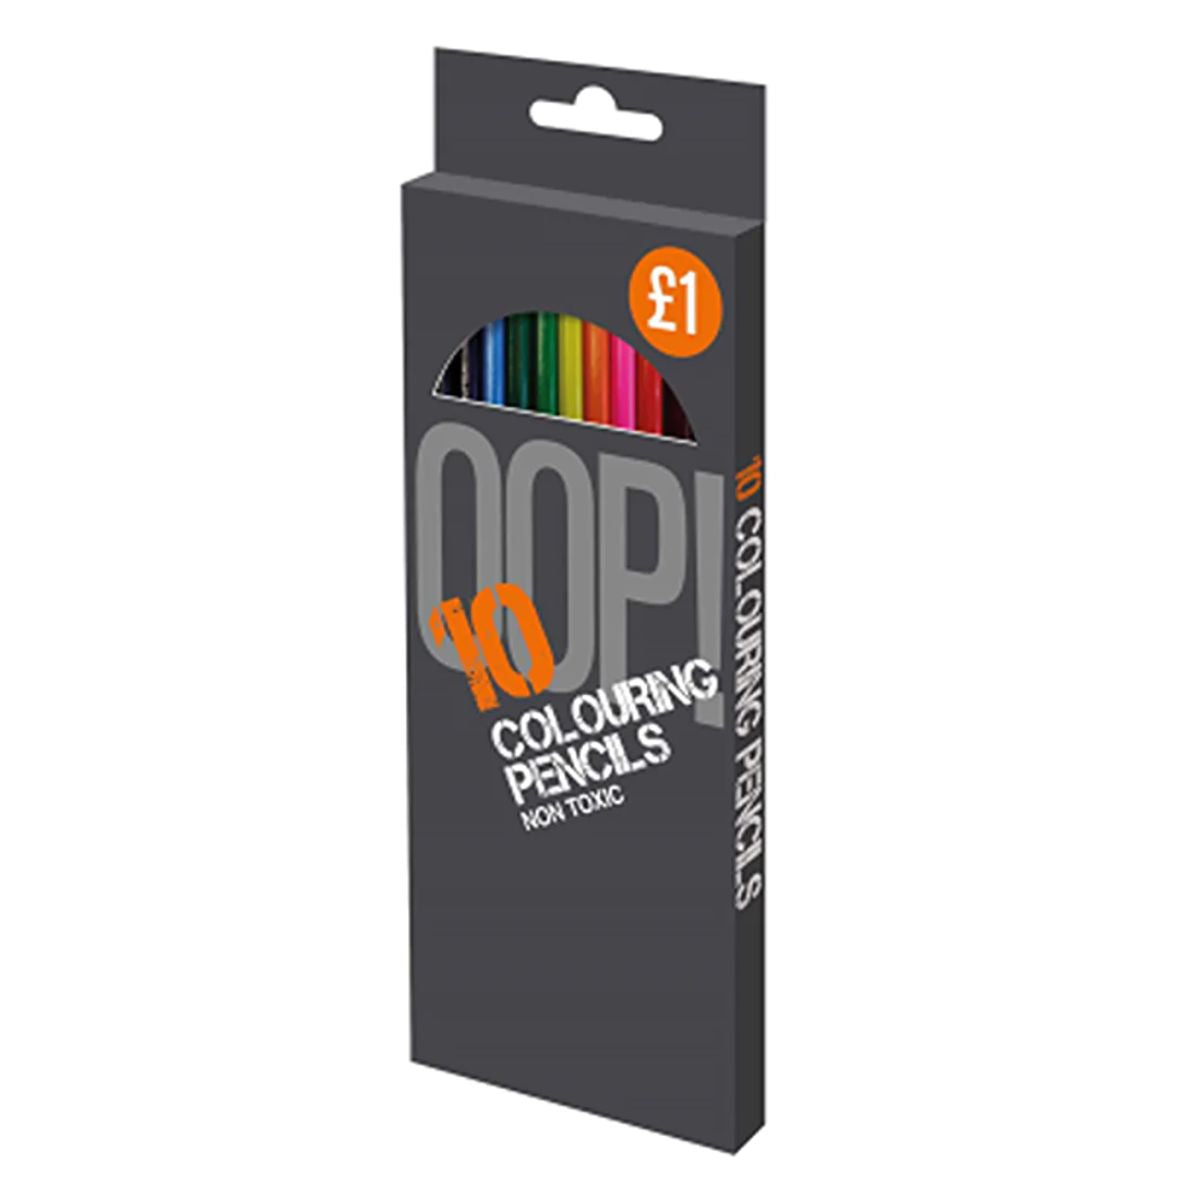 Sentence with Product Name: Oop! - Colouring Pencils - Pack of 10 priced at £1.